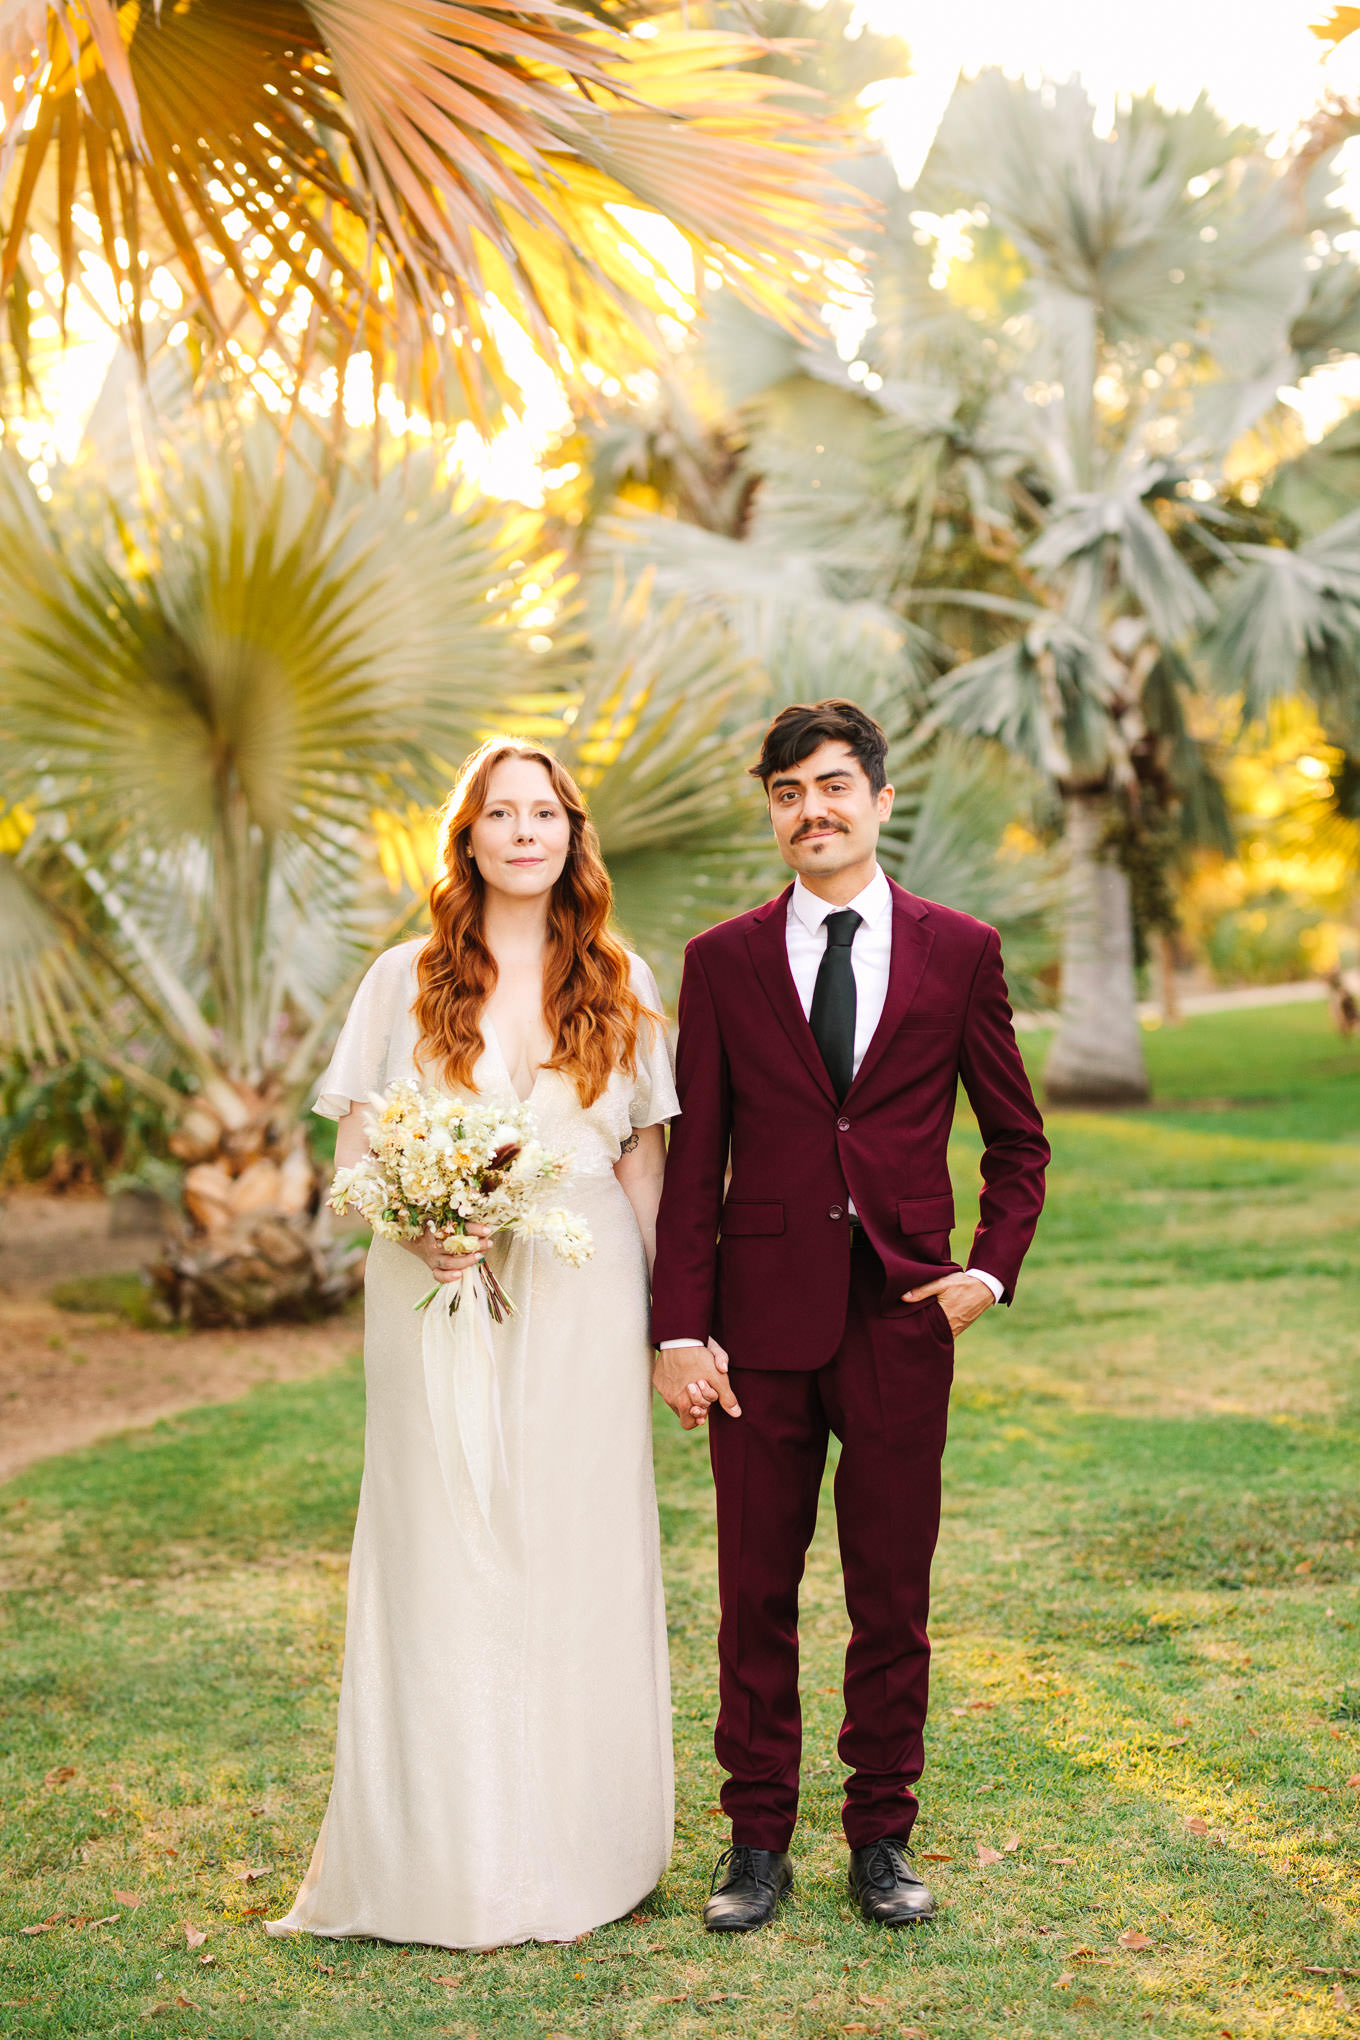 Elopement portrait in palm garden | Los Angeles Arboretum Elopement | Colorful and elevated wedding photography for fun-loving couples in Southern California | #LosAngelesElopement #elopement #LAarboretum #LAskyline #elopementphotos   Source: Mary Costa Photography | Los Angeles